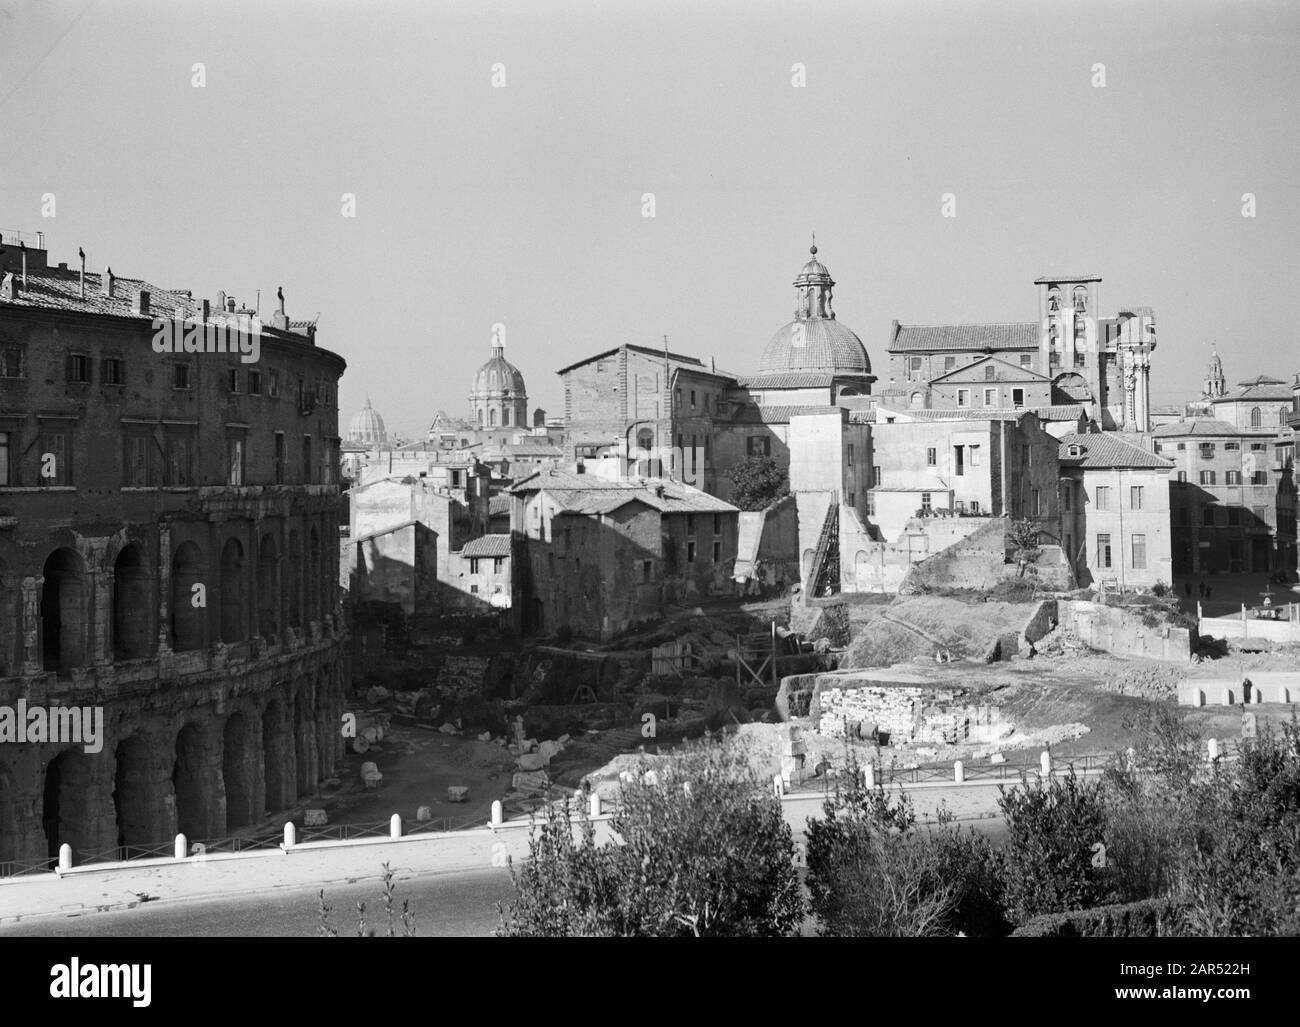 Rome: Visit to Vatican City  View of the Marsveld with left the theatre of Marcellus and in the background the dome of St. Peter's Basilica Date: December 1937 Location: Italy, Rome, Vatican City Keywords: archeology, buildings, church buildings, ruins, city sculptures, theatre Stock Photo